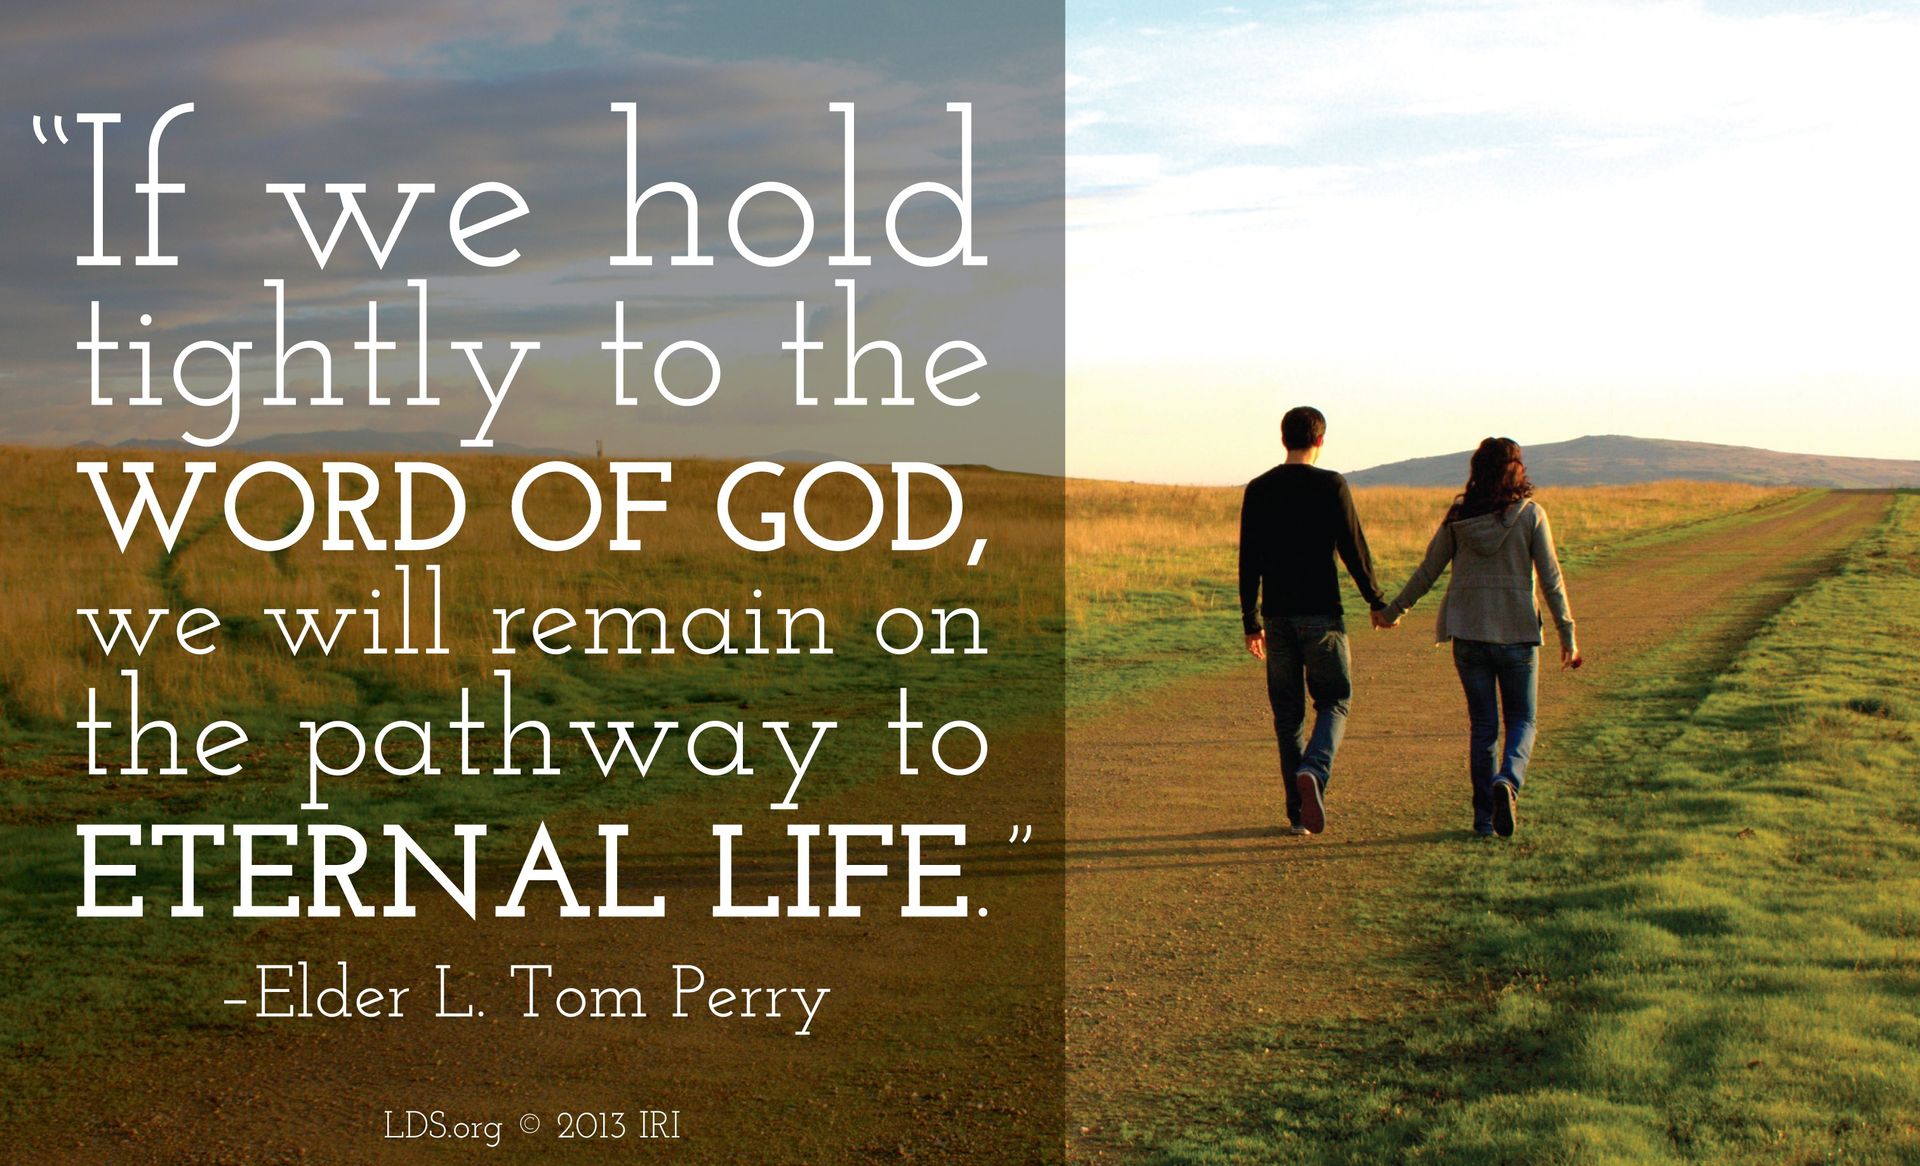 “If we hold tightly to the word of God, we will remain on the pathway to eternal life.”—Elder L. Tom Perry, “The Doctrines and Principles Contained in the Articles of Faith” © undefined ipCode 1.